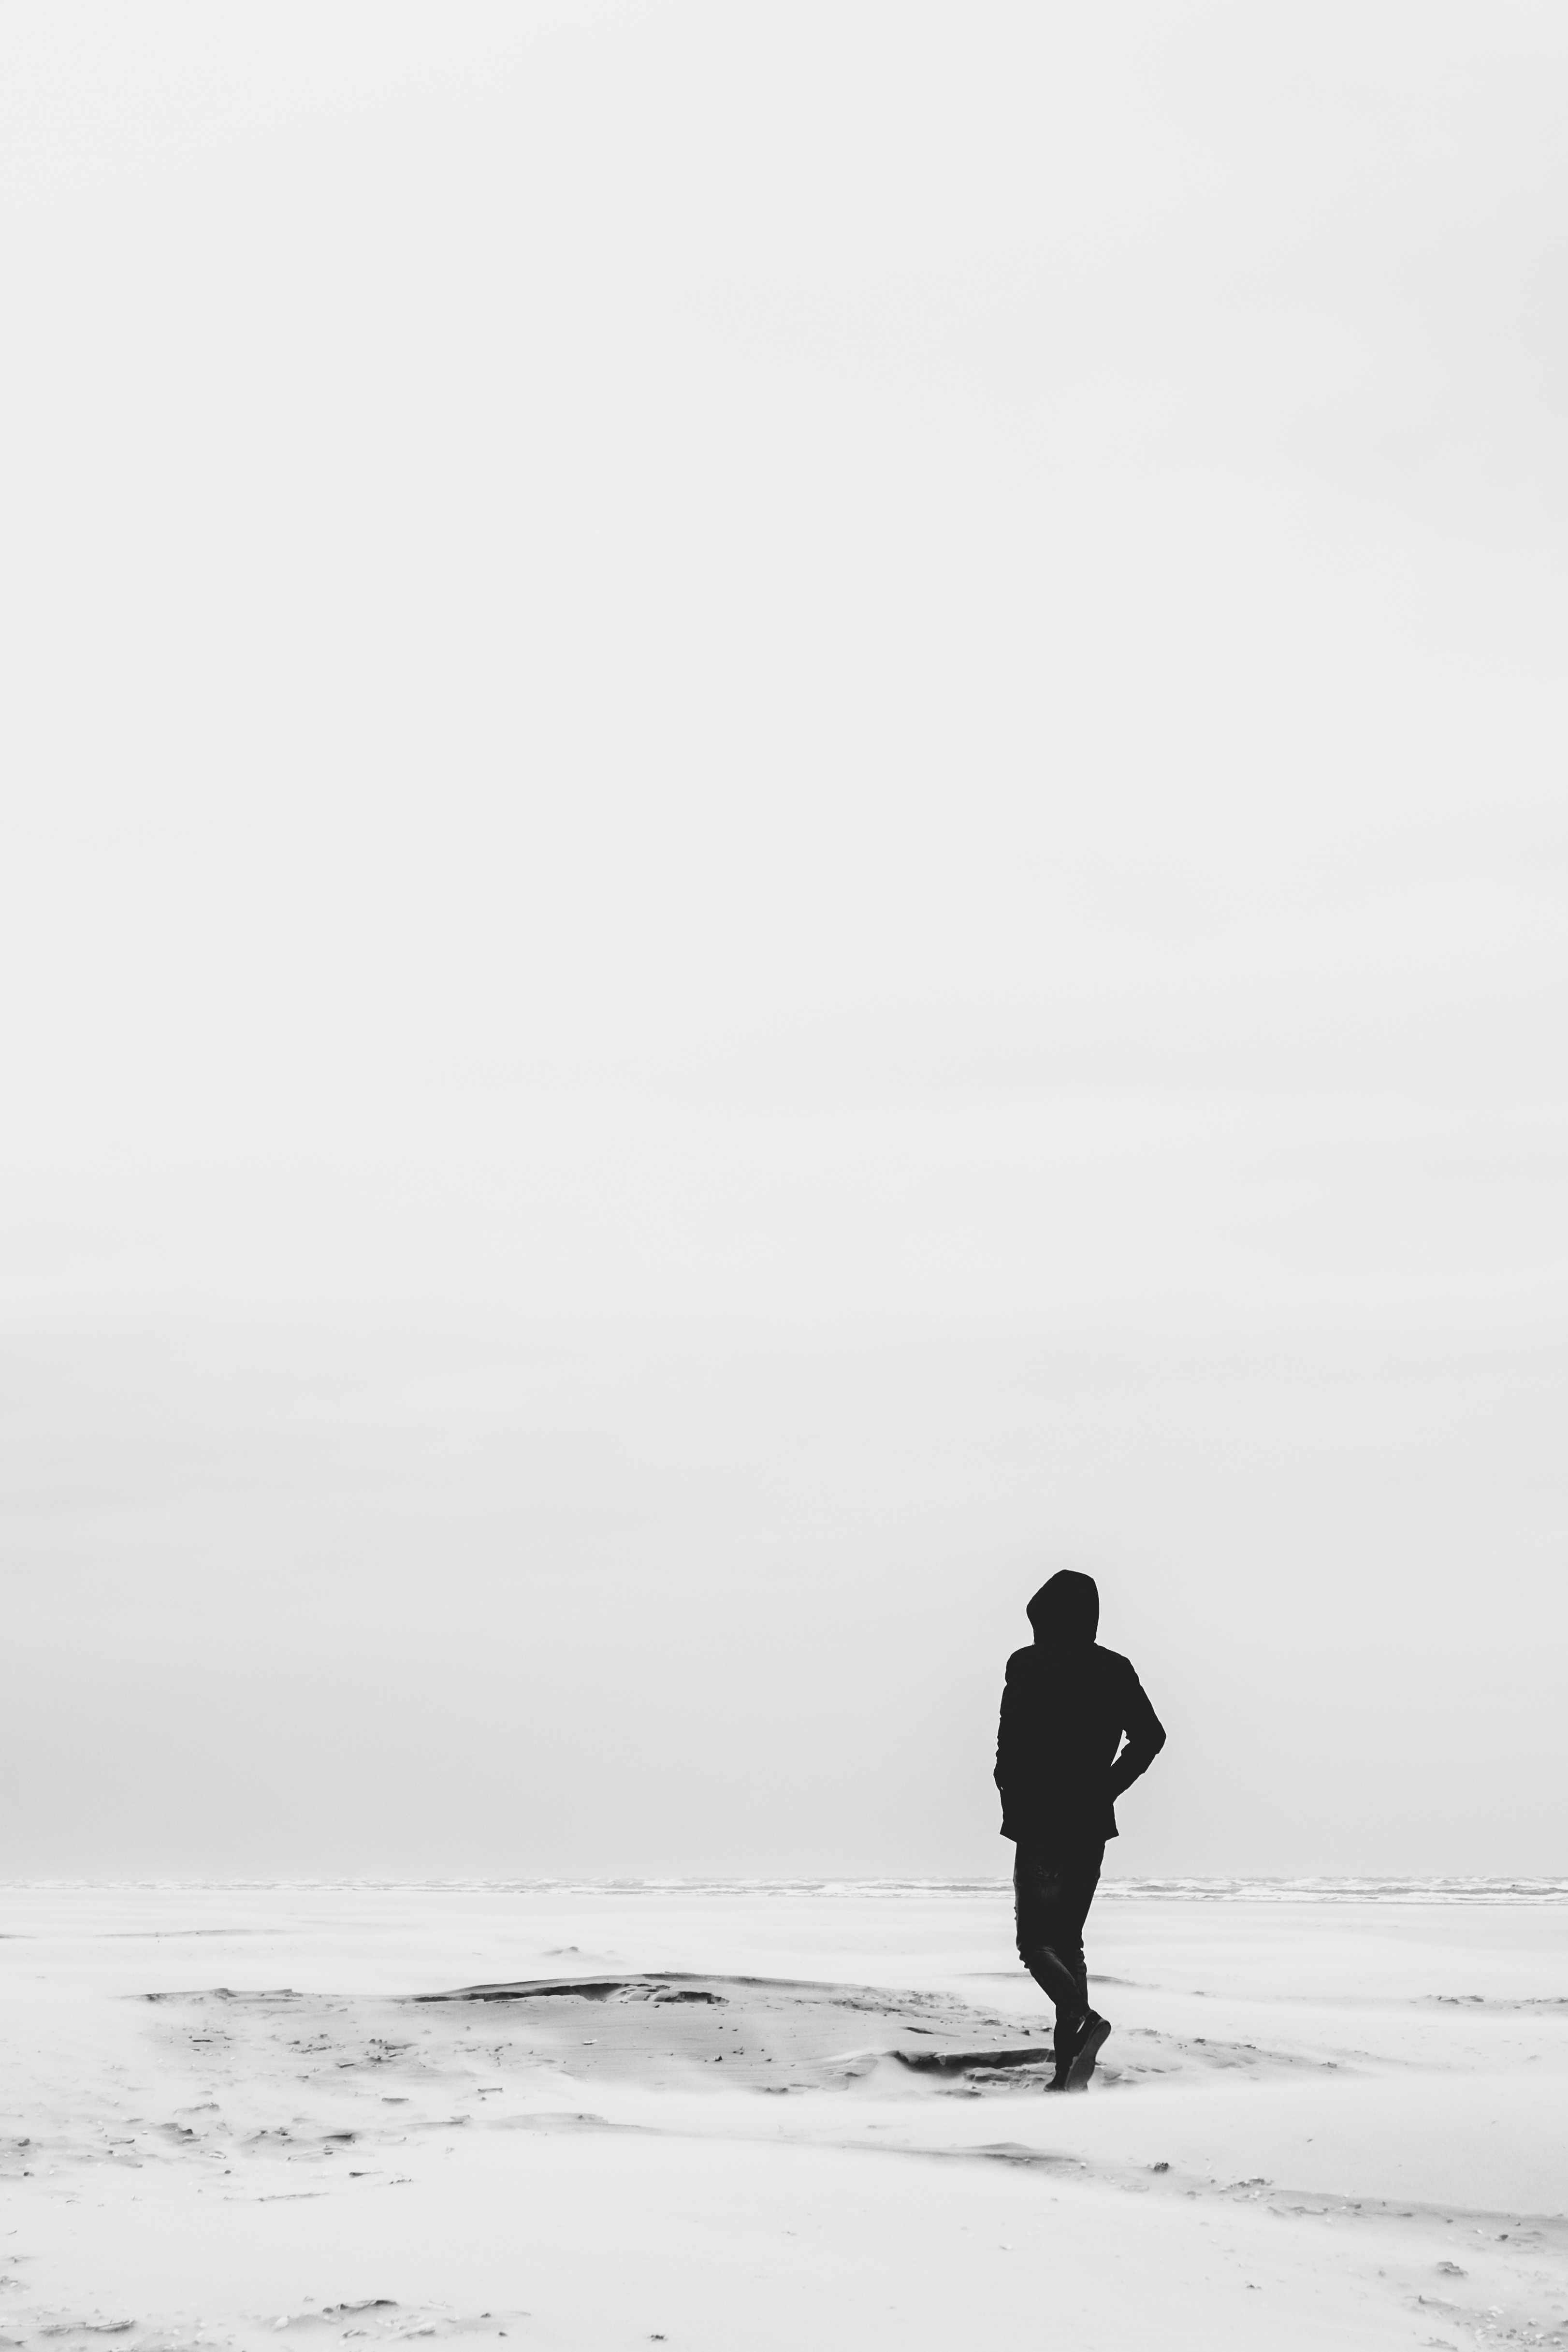 bw, loneliness, alone, sand, desert, miscellanea, miscellaneous, chb, lonely iphone wallpaper